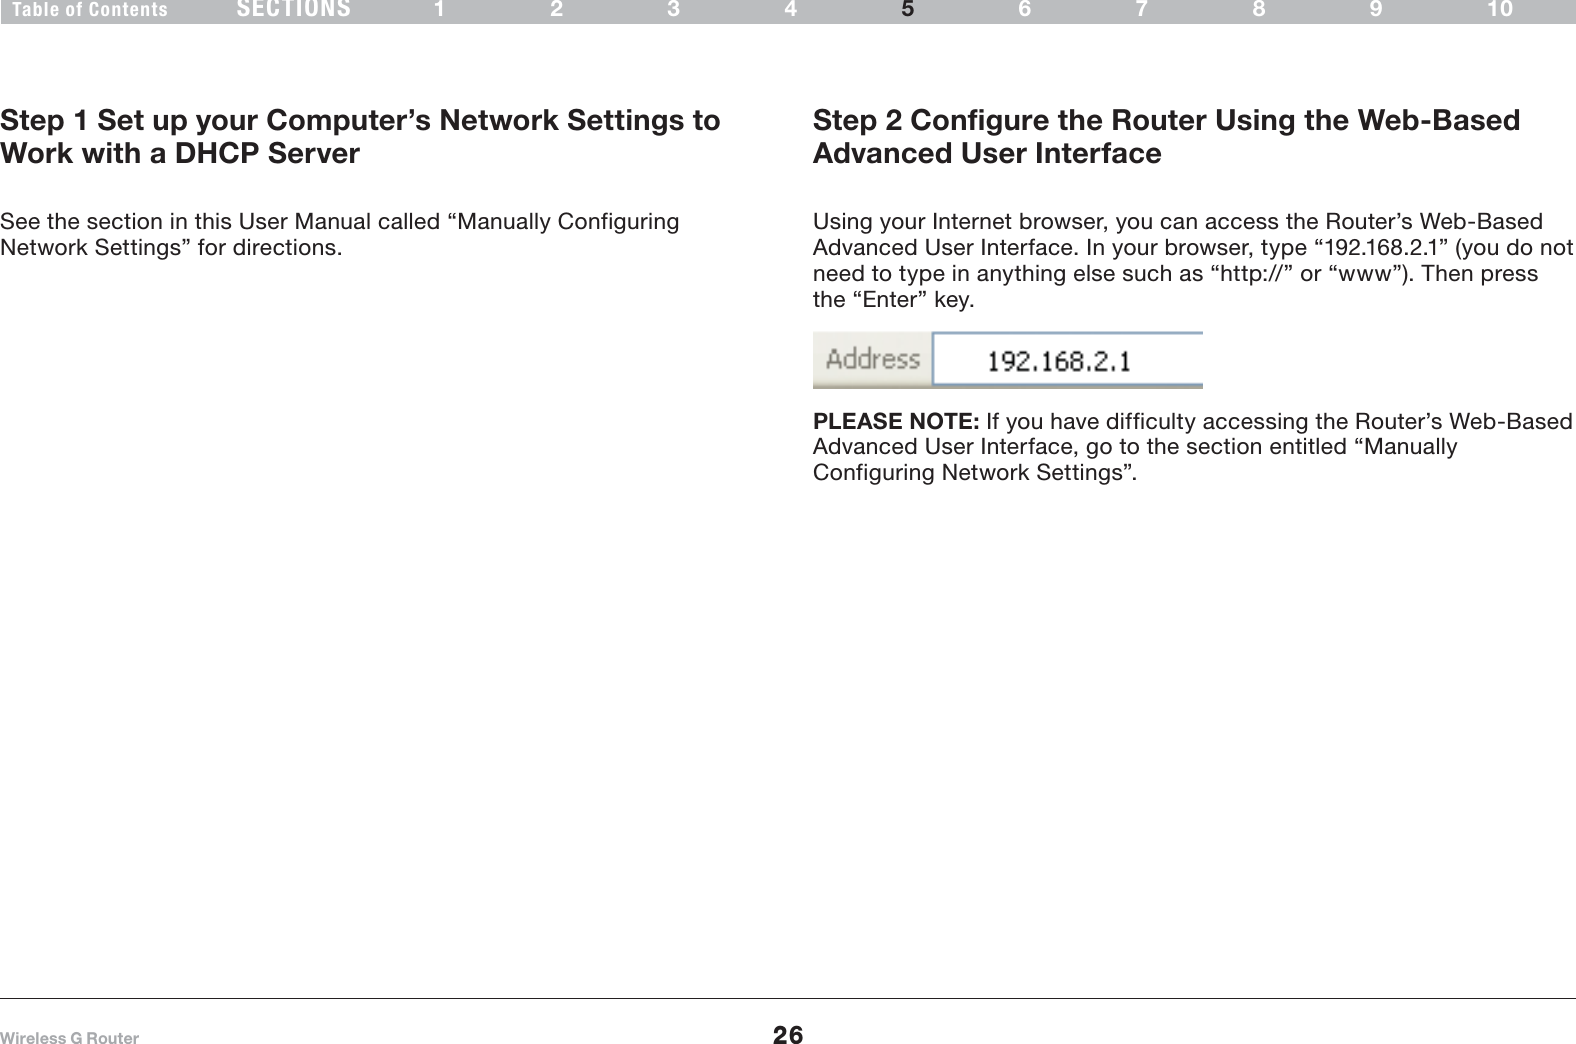 26Wireless G RouterSECTIONSTable of Contents 1234 6789105ALTERNATE SETUP METHODStep 1 Set up your Computer’s Network Settings to Work with a DHCP ServerSee the section in this User Manual called “Manually Configuring Network Settings” for directions.Step 2 Configure the Router Using the Web-Based Advanced User Interface Using your Internet browser, you can access the Router’s Web-Based Advanced User Interface. In your browser, type “192.168.2.1” (you do not need to type in anything else such as “http://” or “www”). Then press the “Enter” key.PLEASE NOTE: If you have difficulty accessing the Router’s Web-Based Advanced User Interface, go to the section entitled “Manually Configuring Network Settings”.